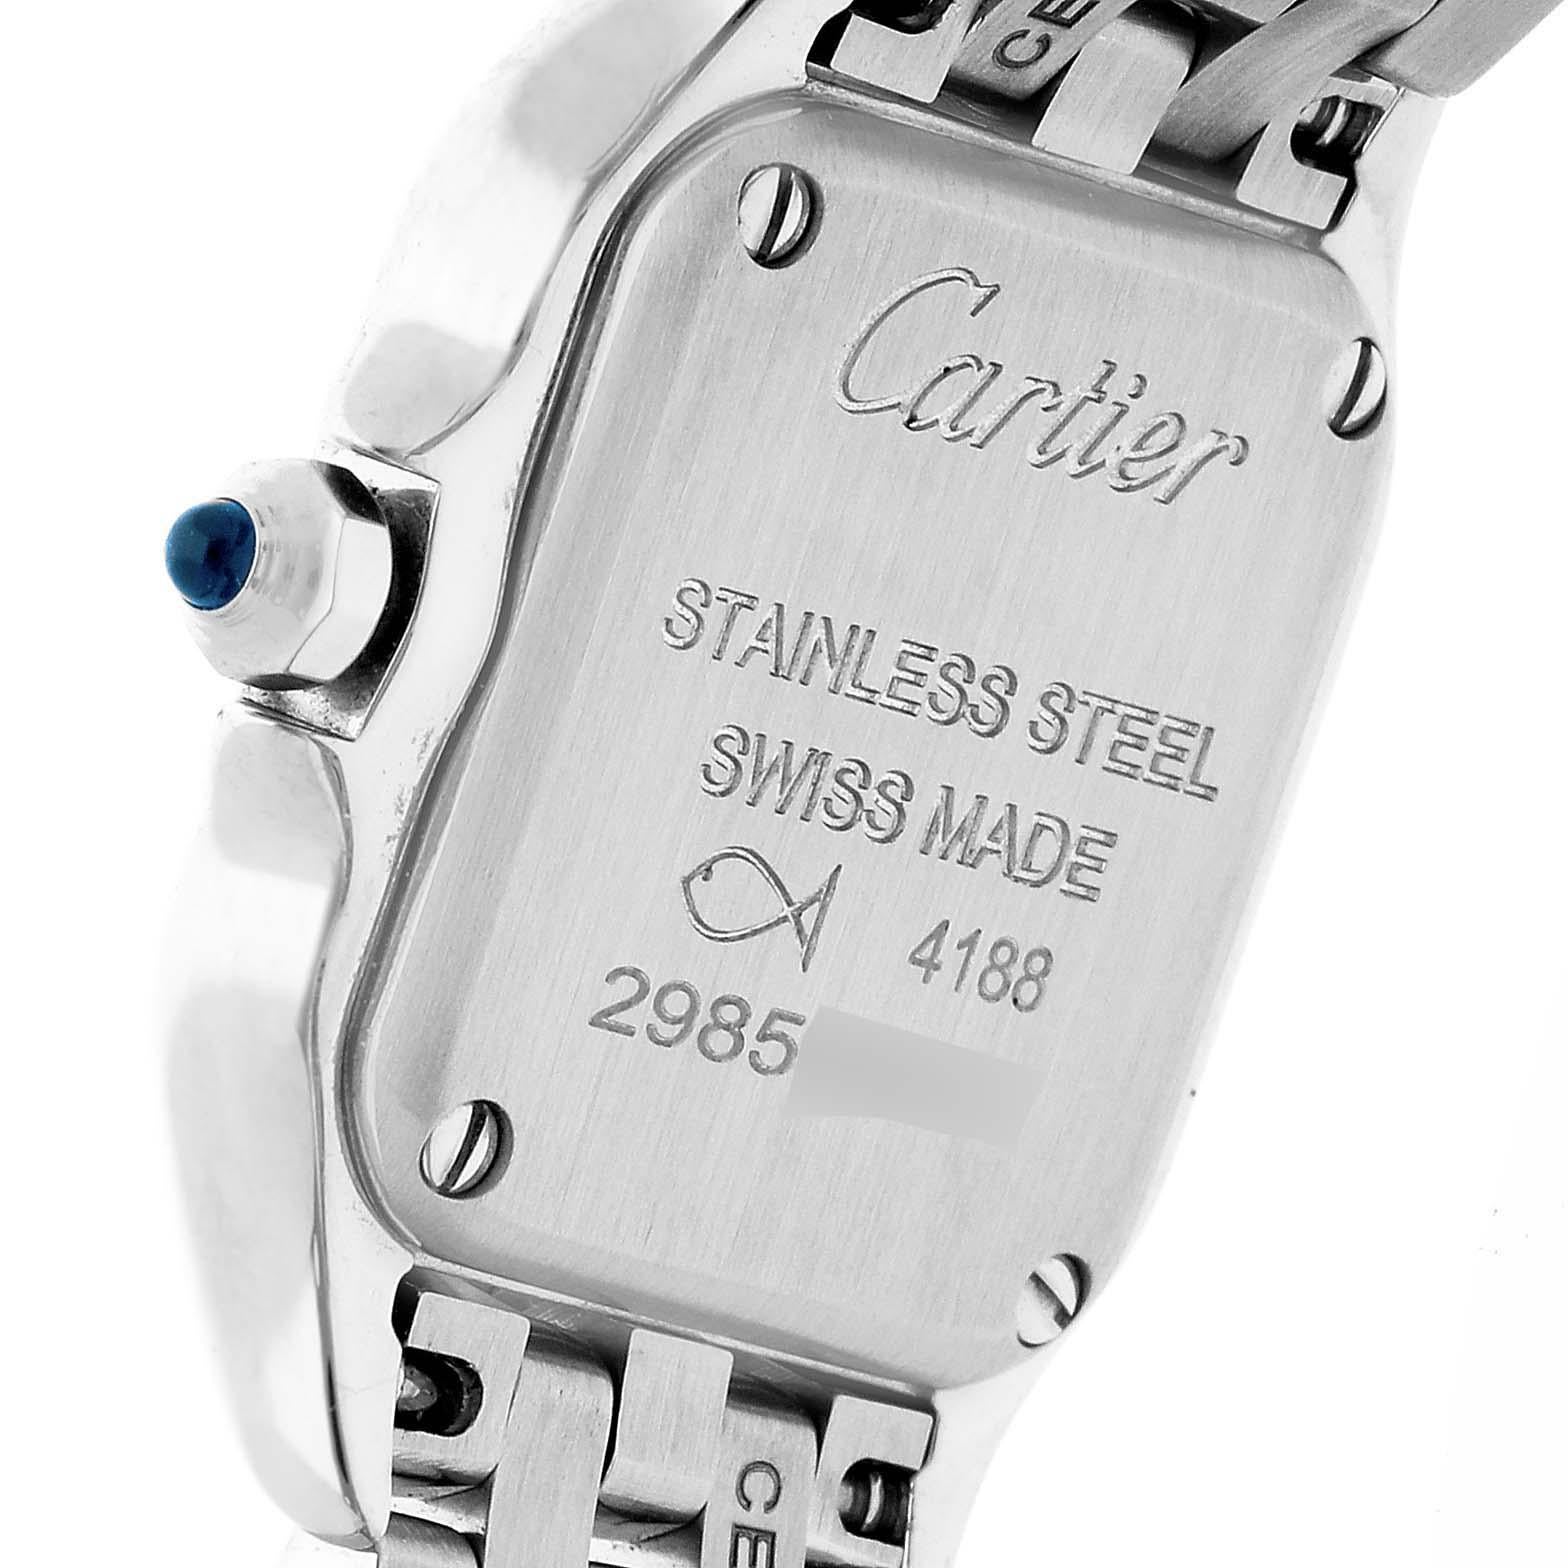 Cartier Panthere Mini Stainless Steel Ladies Watch WSPN0019 Unworn. Quartz movement. Stainless steel case 25.0 x 21.0 mm. Octagonal crown set with blue spinel cabochon. Stainless steel polished bezel, secured with 8 stainless steel pins. Scratch